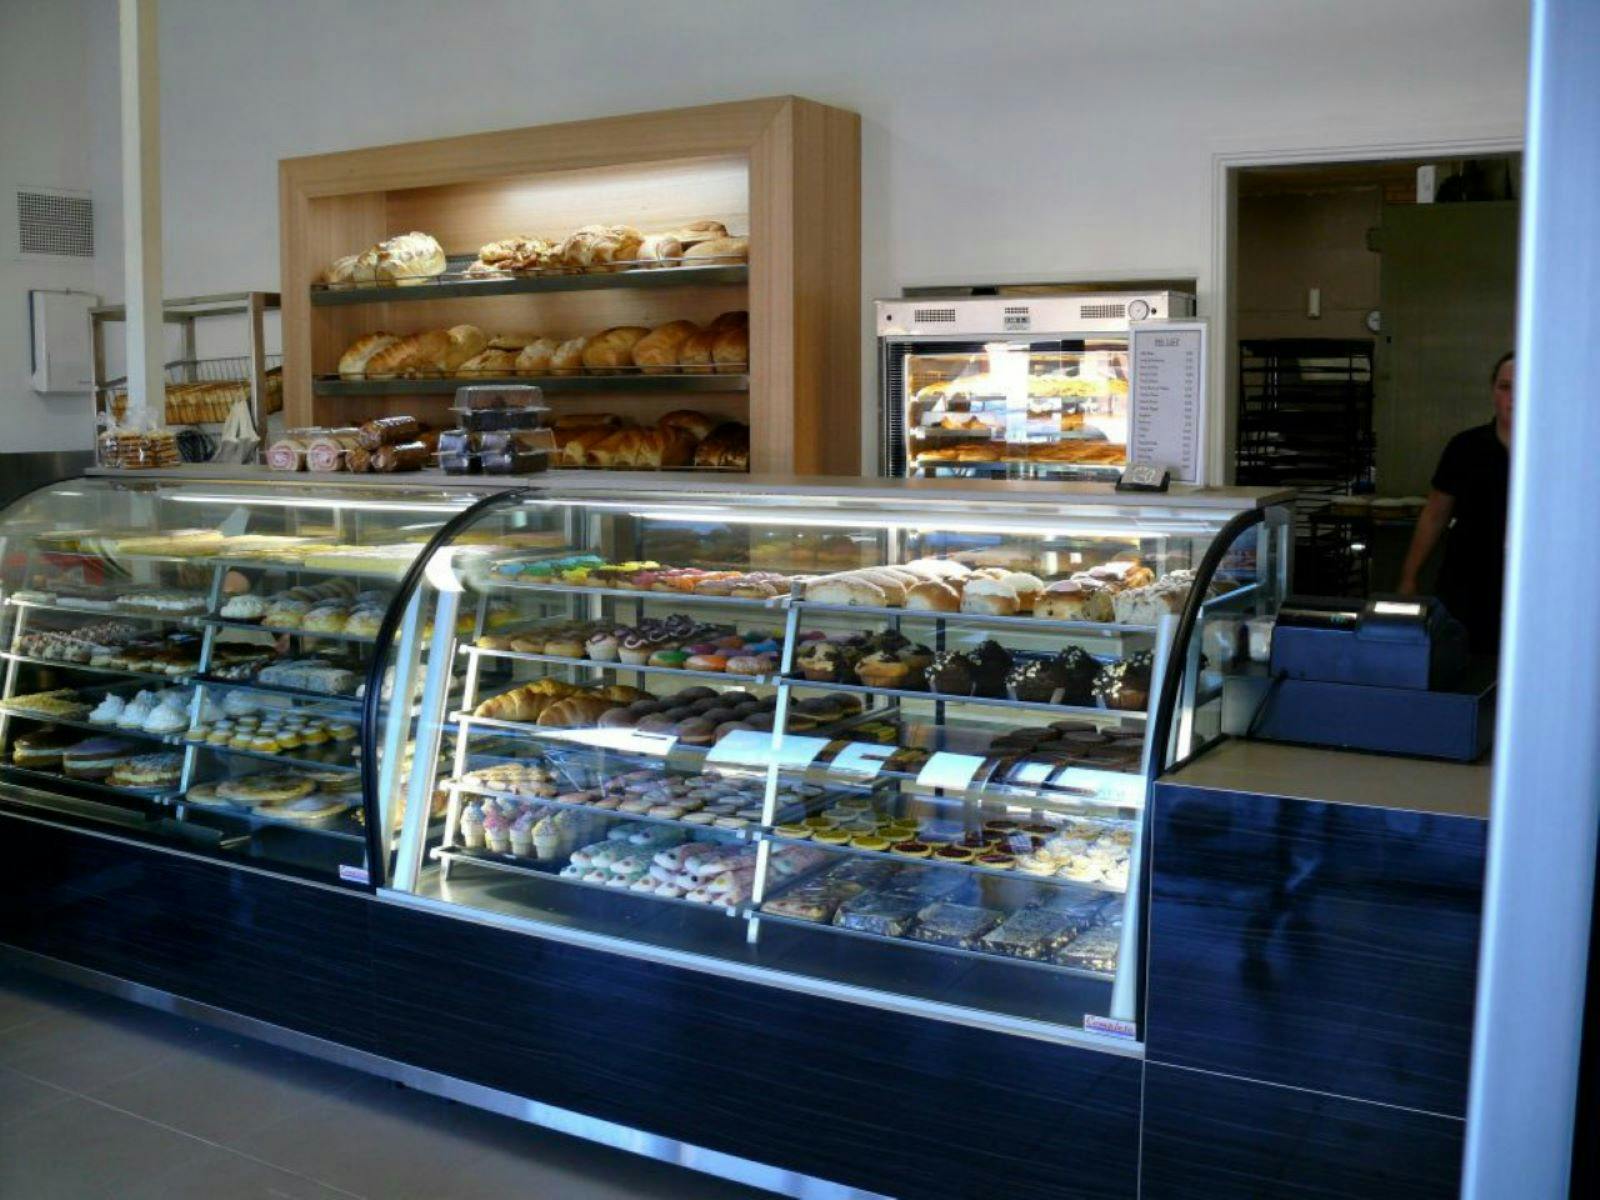 Appin St Bakery